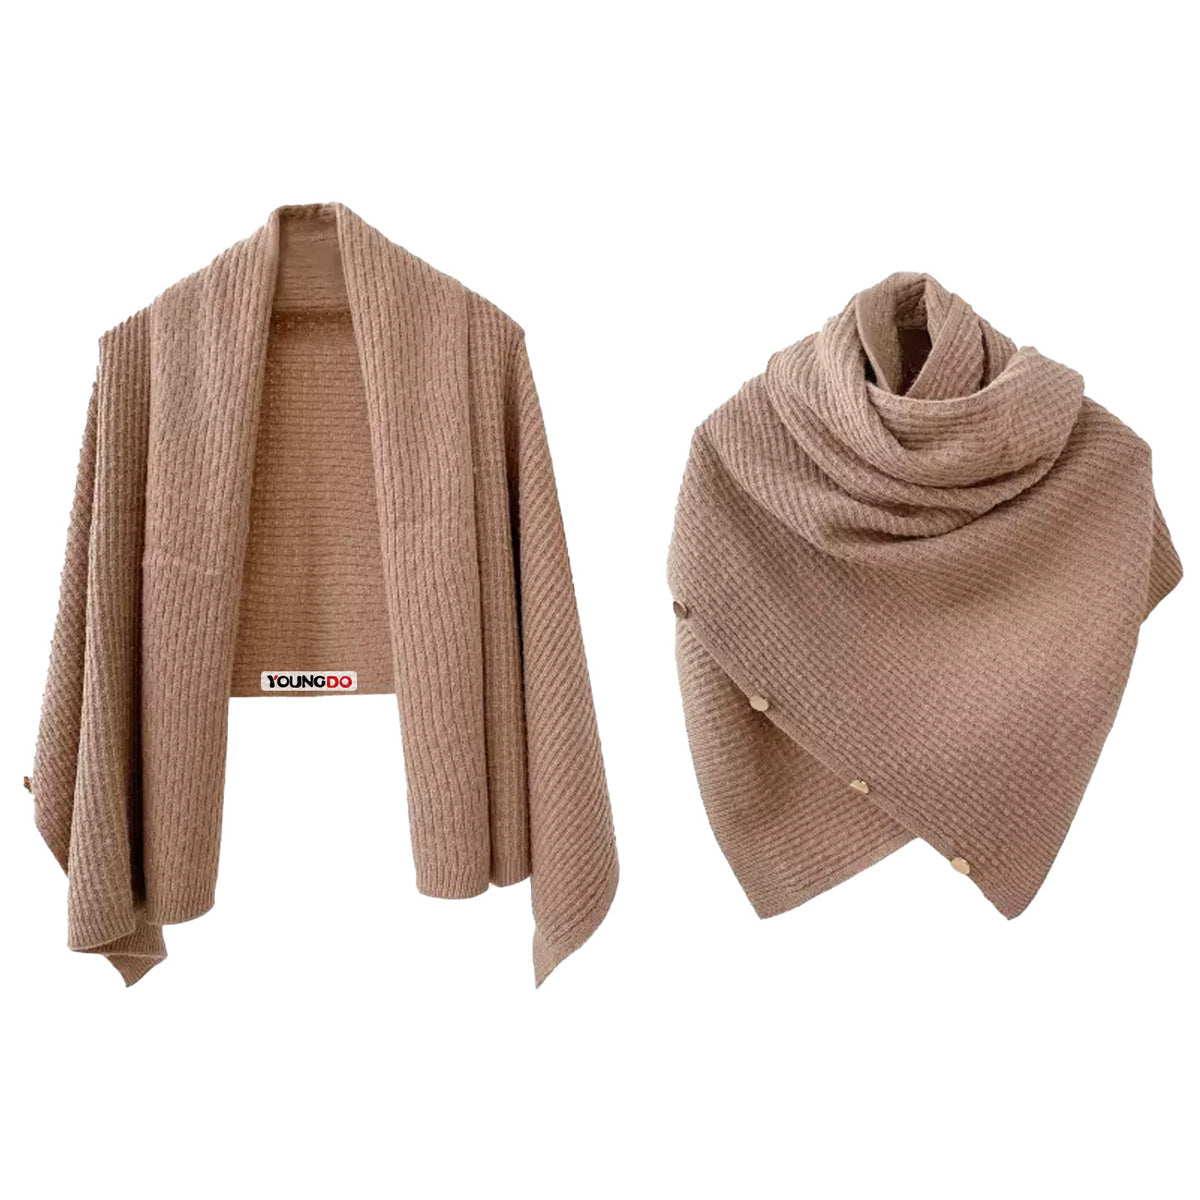 YOUNGDO Shawls and Wraps, Winter Warm Long Large Scarves for women